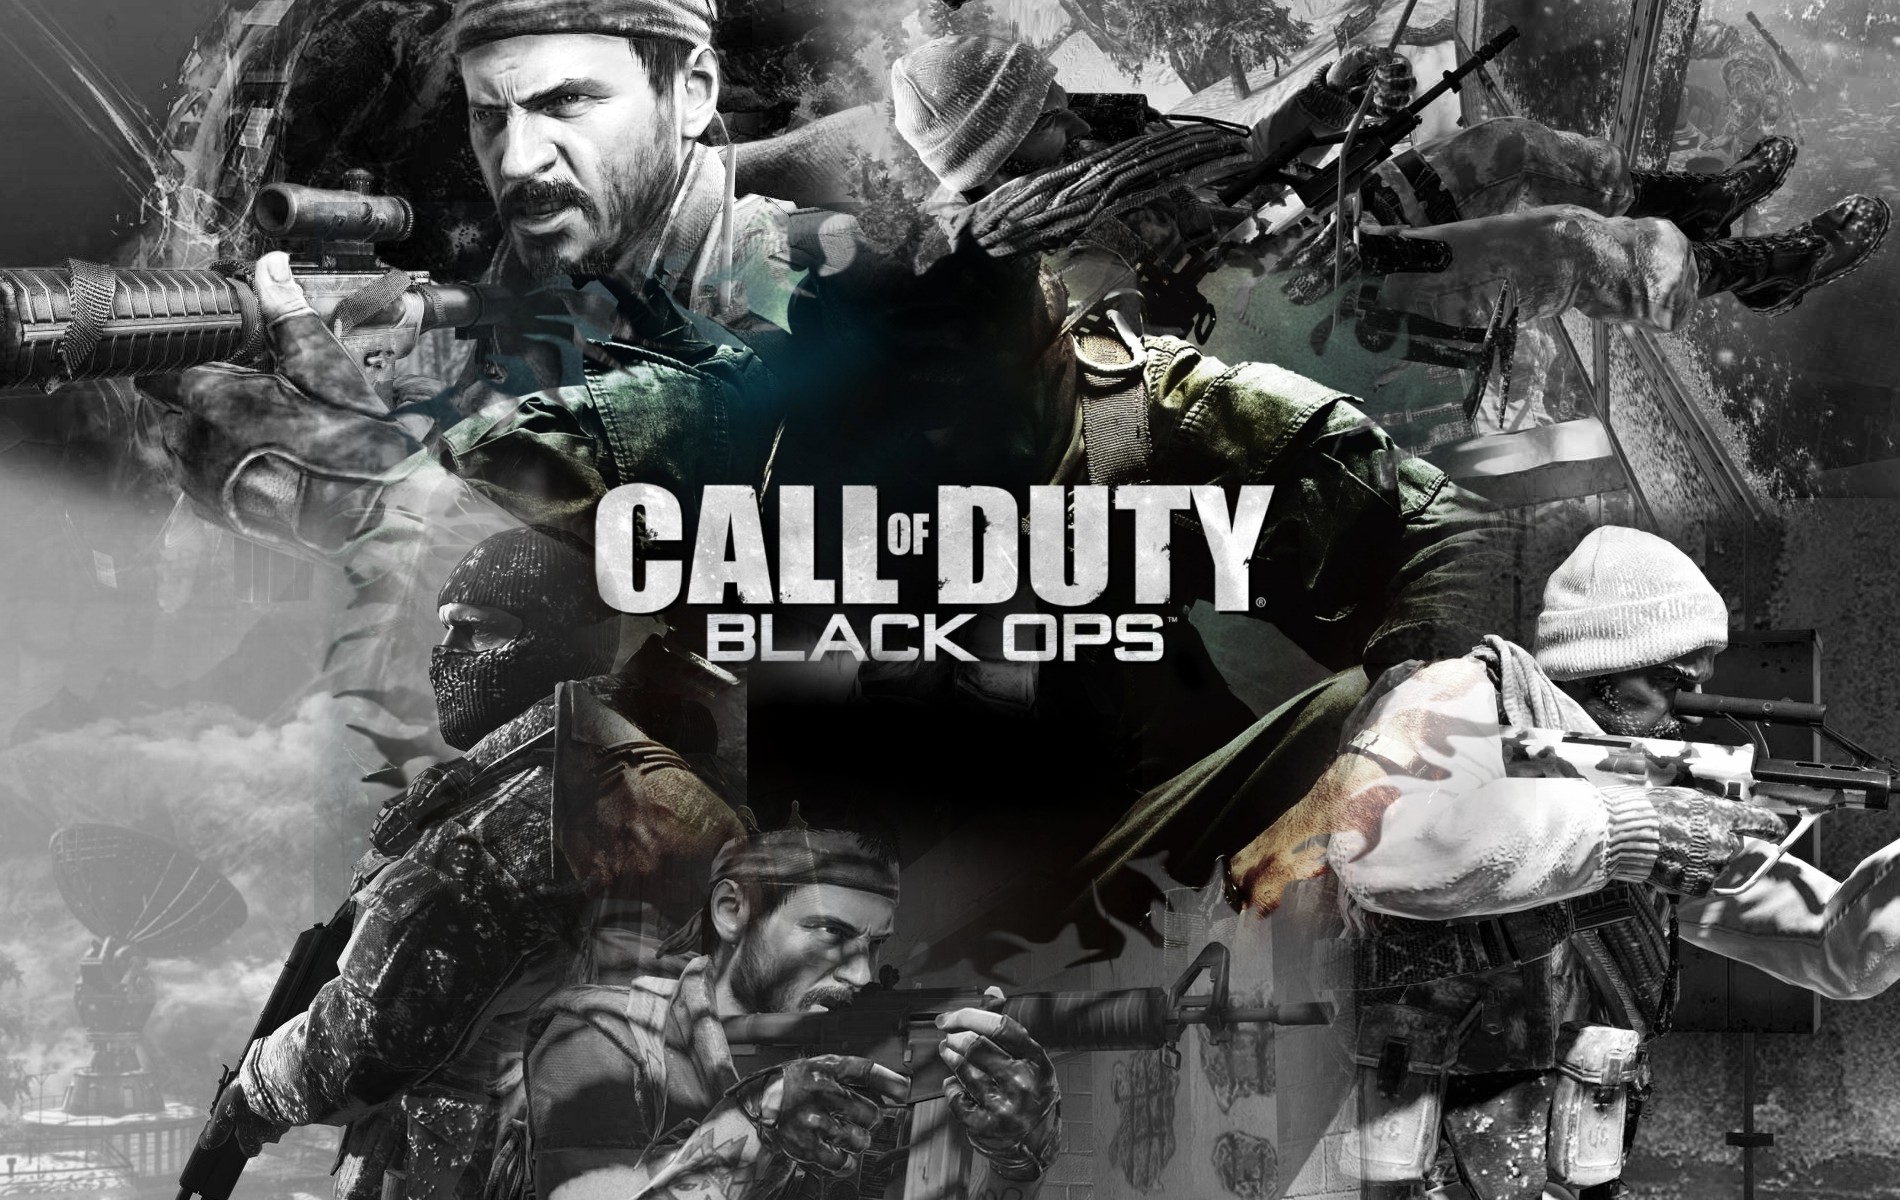  Duty Black Ops You are downloading Call of Duty Black Ops wallpaper 7